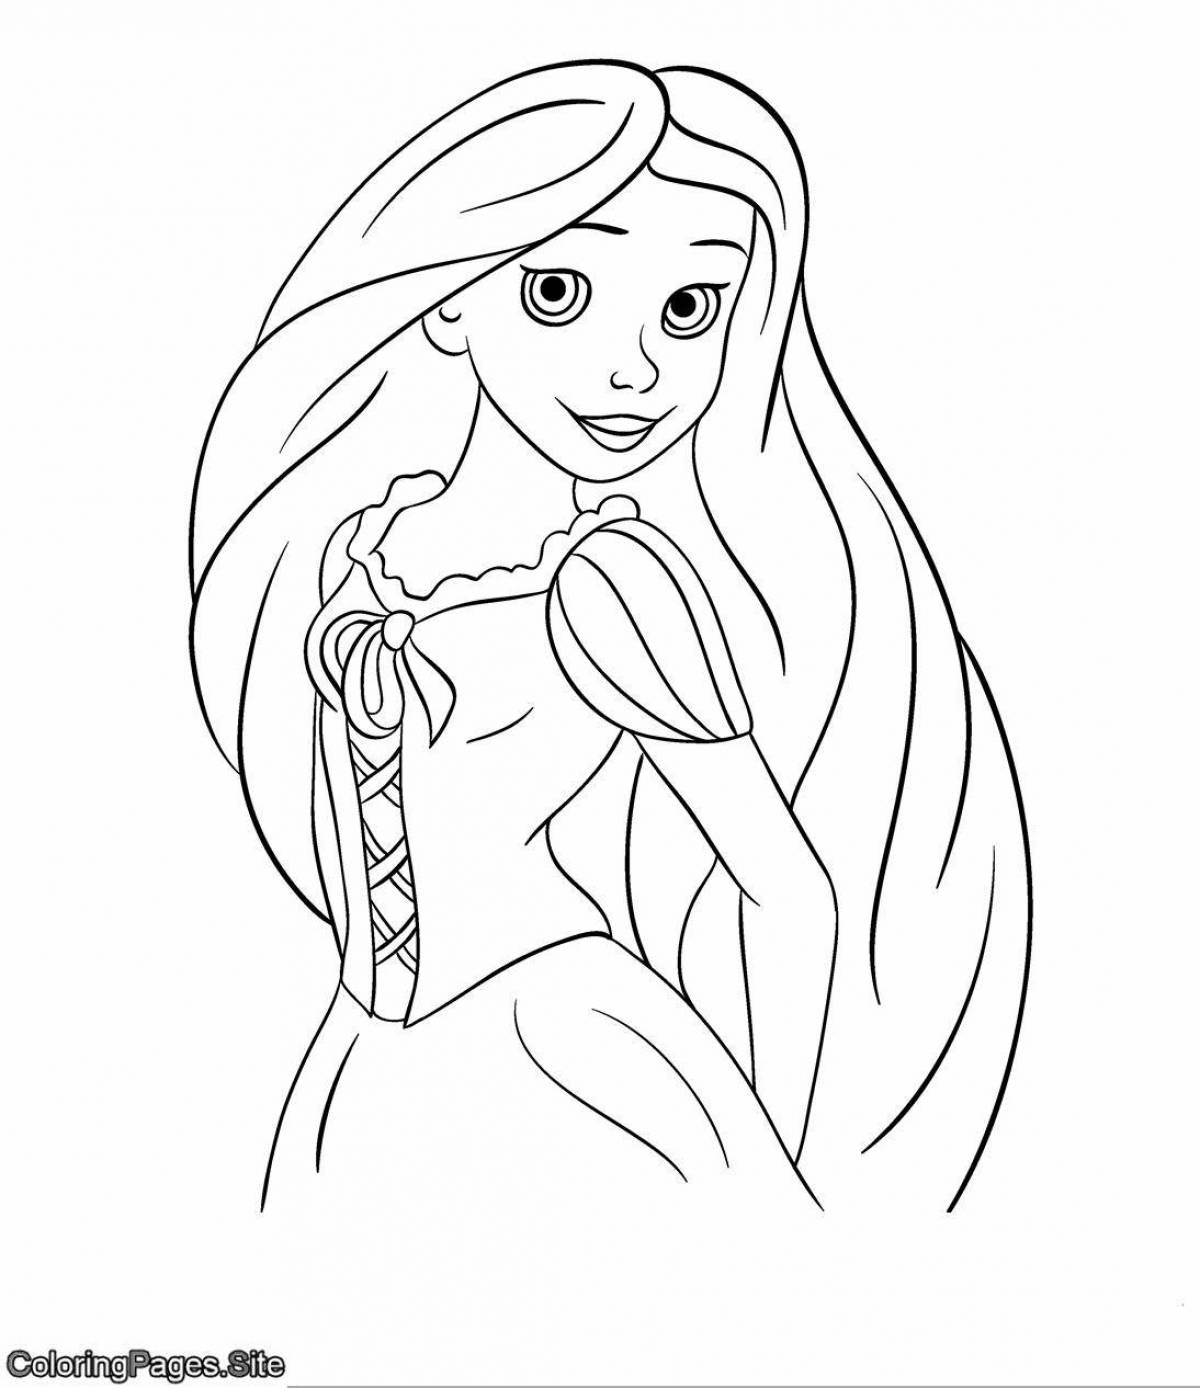 Coloring majestic long-haired princess